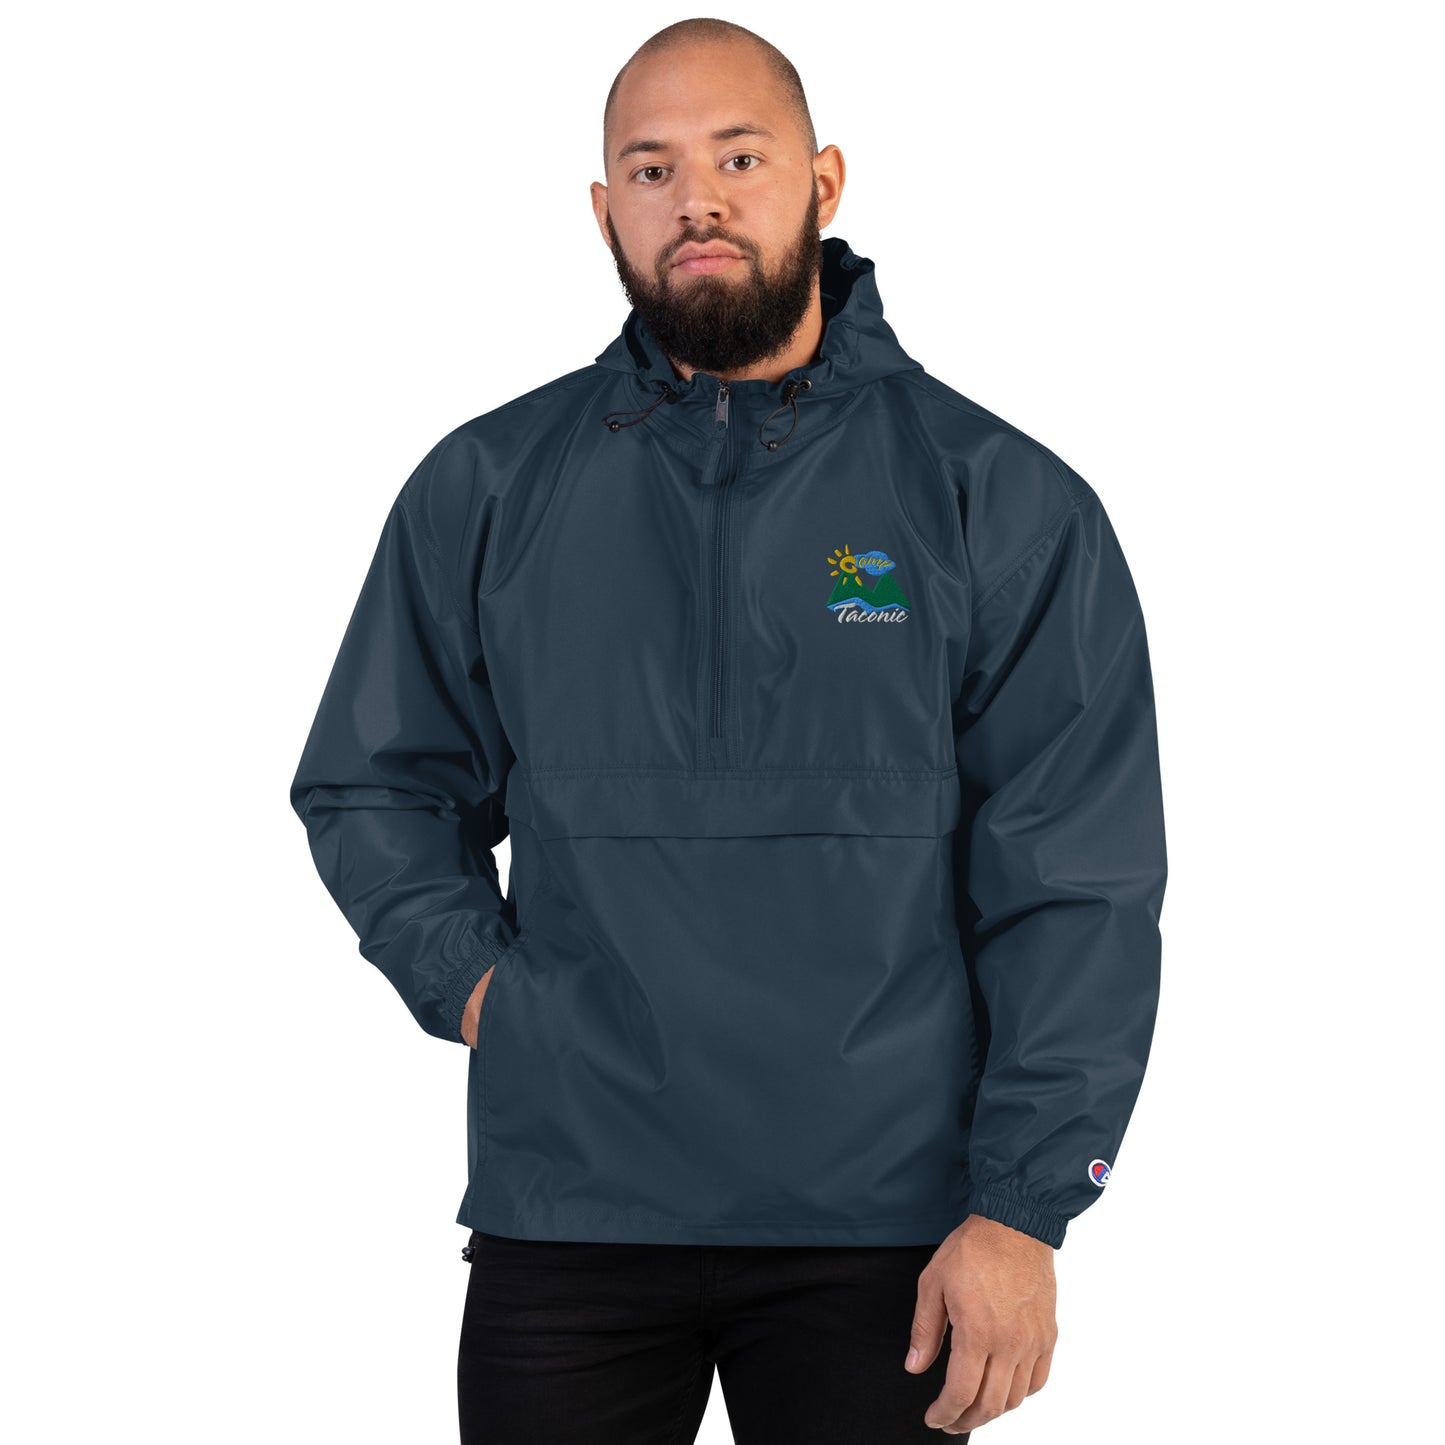 Taconic Embroidered Champion Pullover Jacket